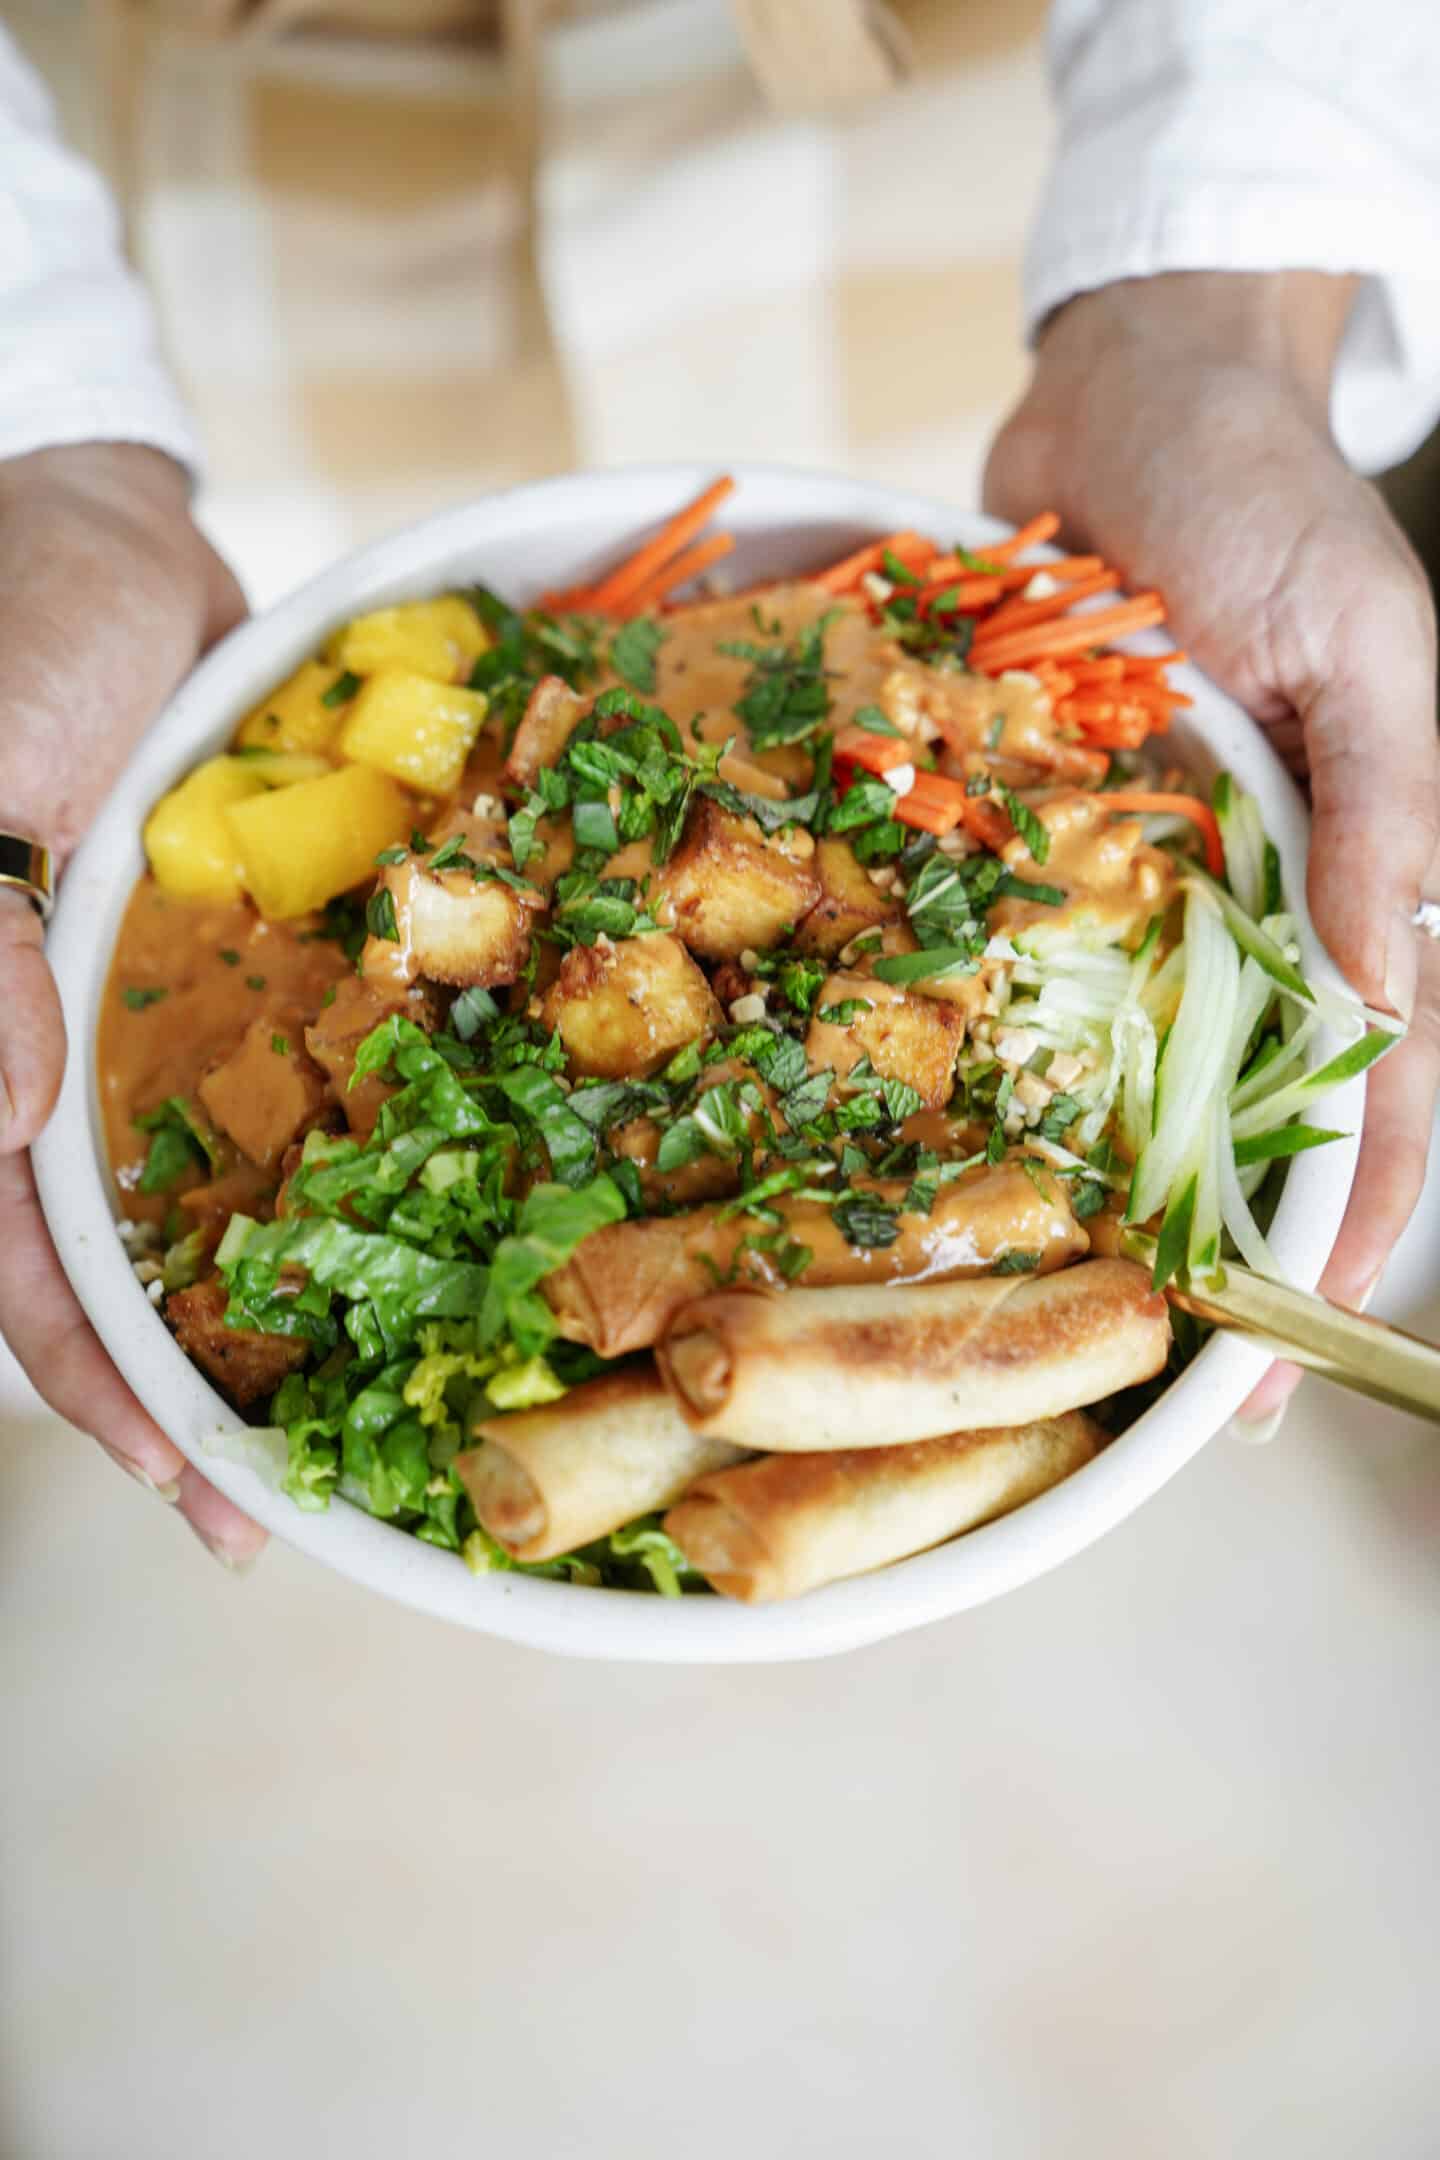 Hands holding a Vermicelli Noodle Bowl in a white bowl